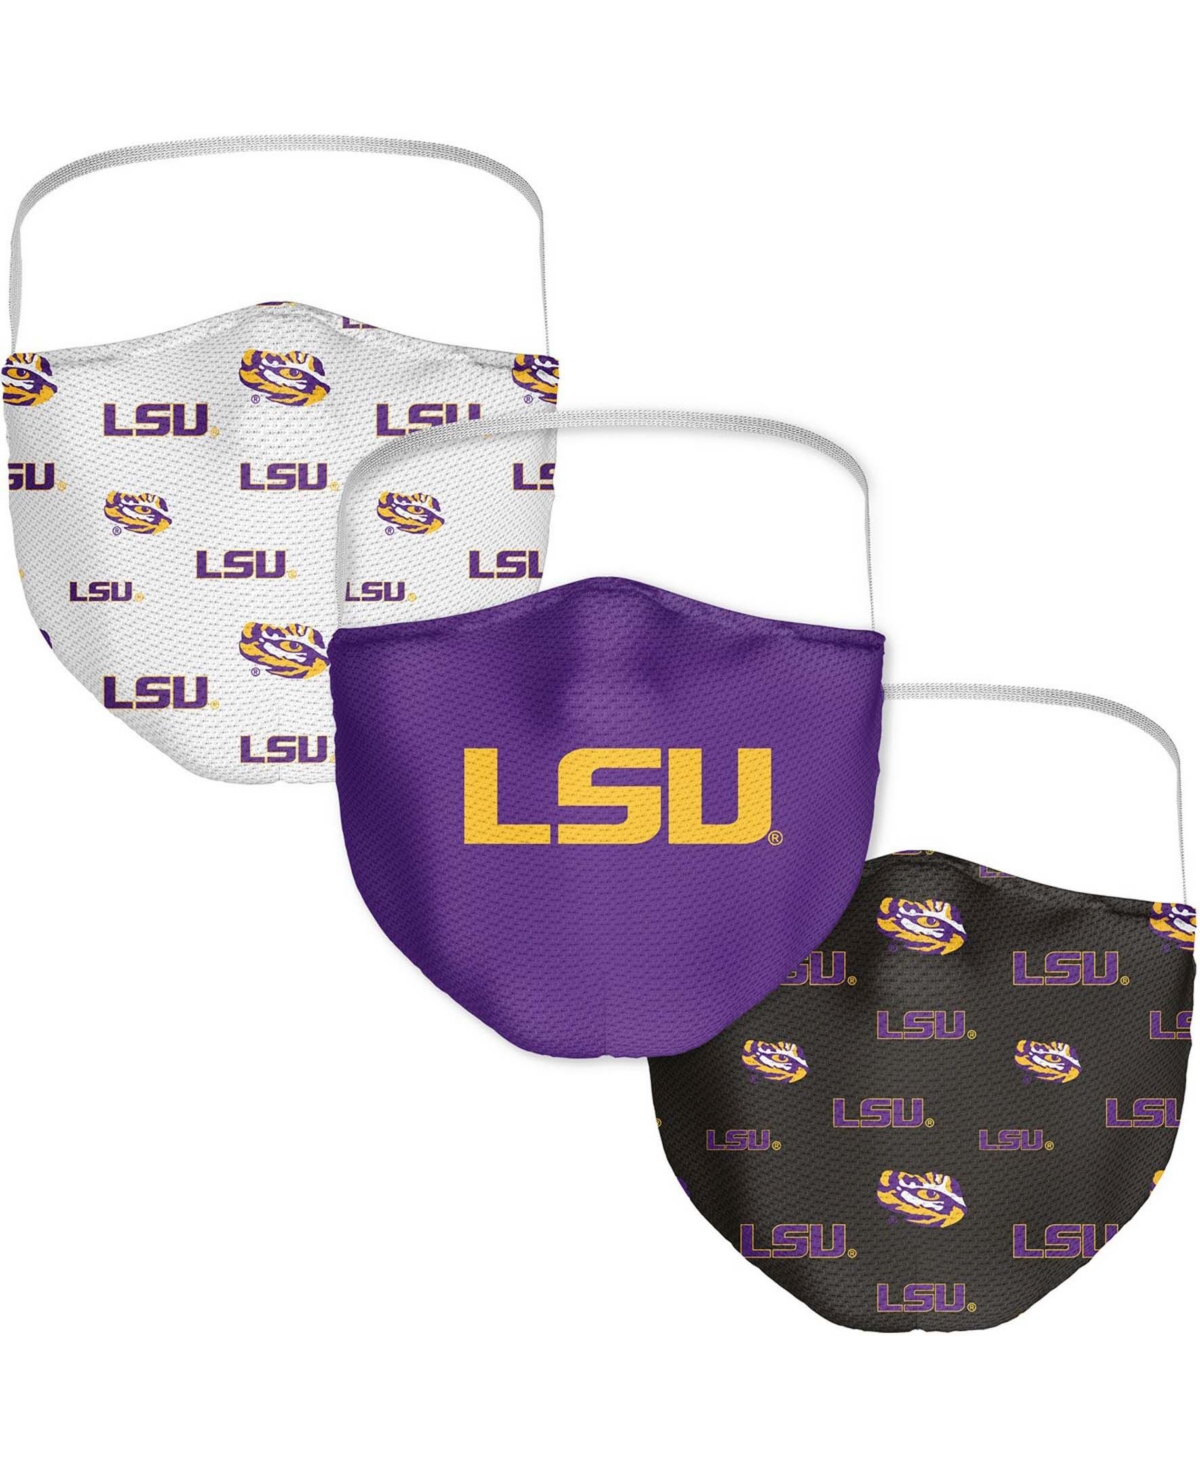 Multi Adult Lsu Tigers All Over Logo Face Covering 3-Pack - Multi